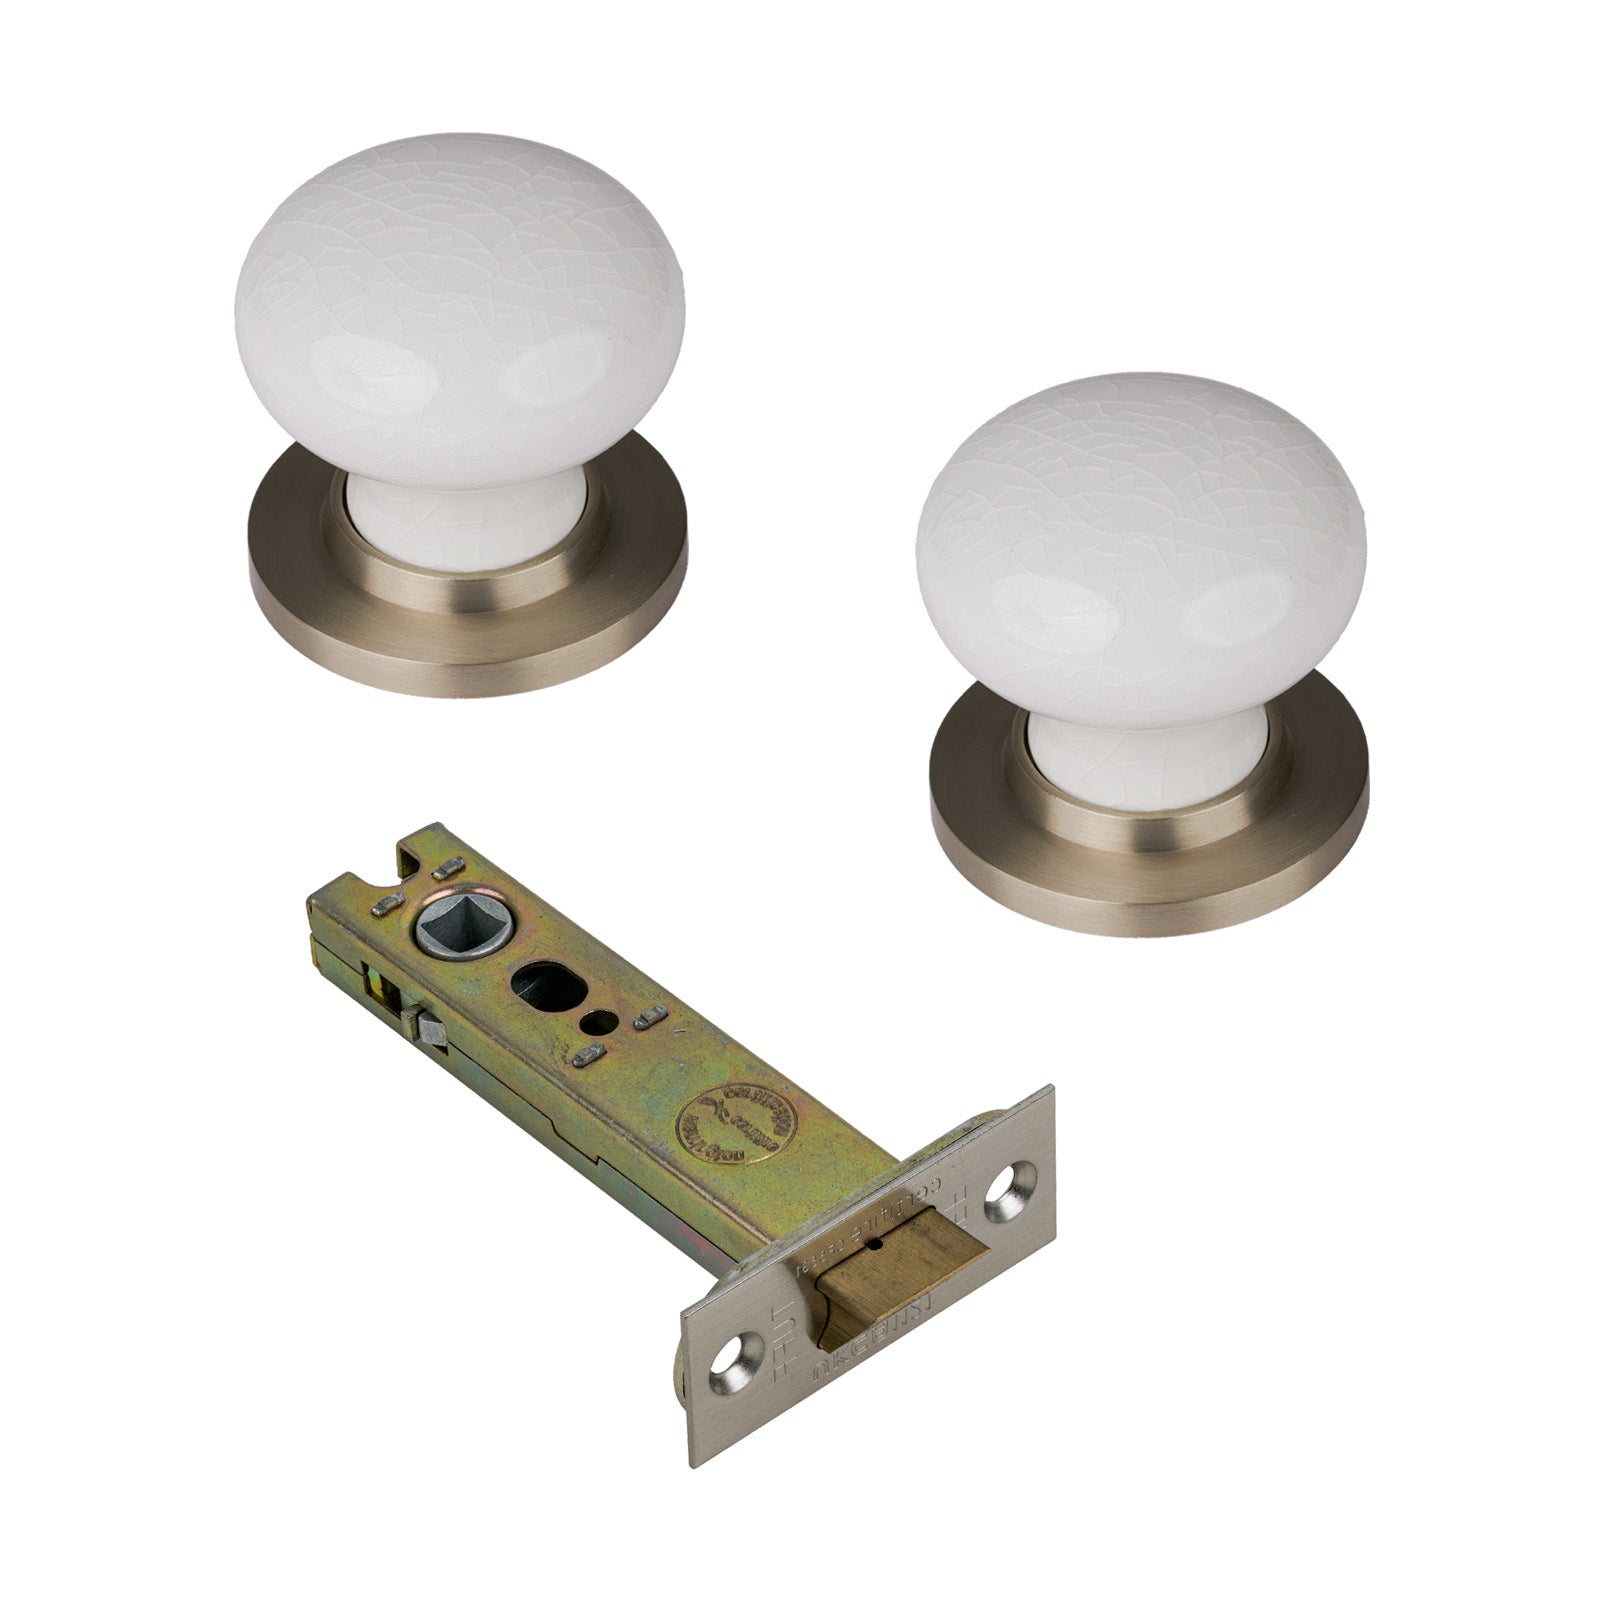 SHOW White Crackle Porcelain Door Knob with Satin Nickel Rose with 3 inch latch